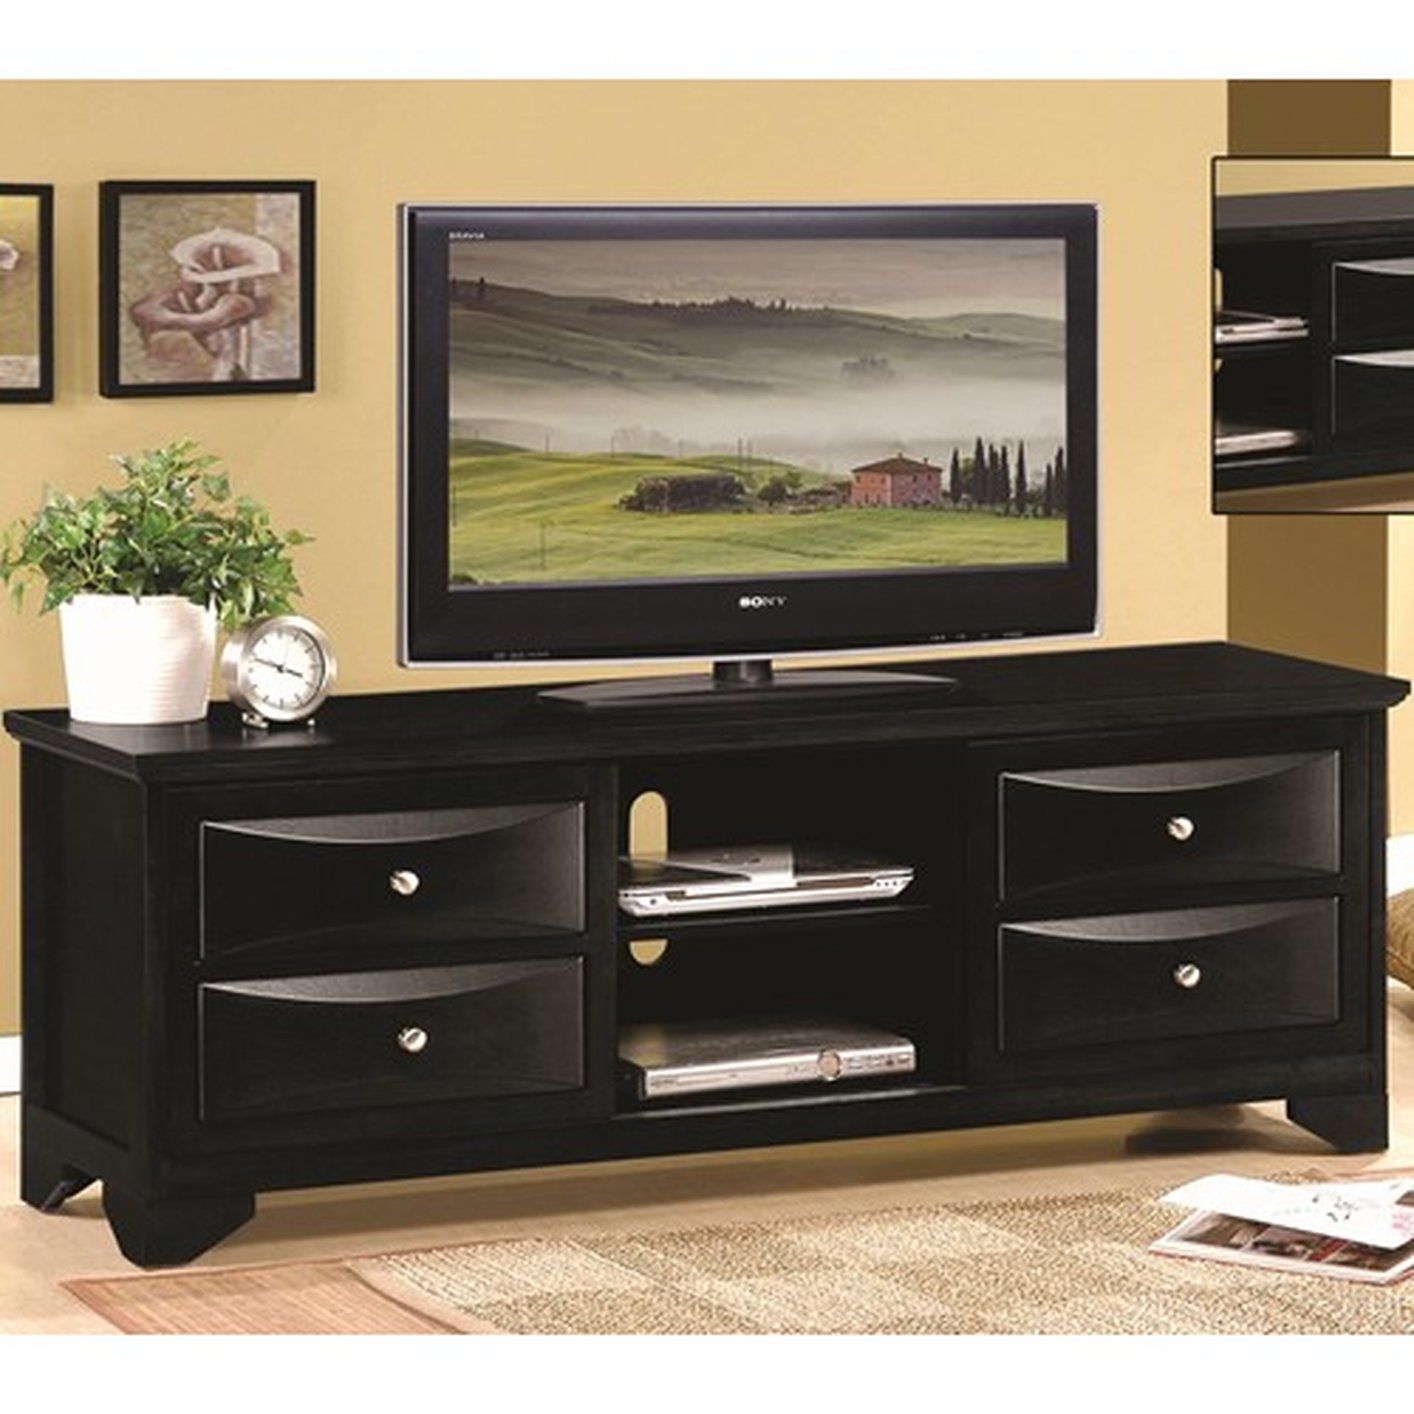 Black Wood Tv Stand – Steal A Sofa Furniture Outlet Los In Edgeware Black Tv Stands (View 3 of 15)